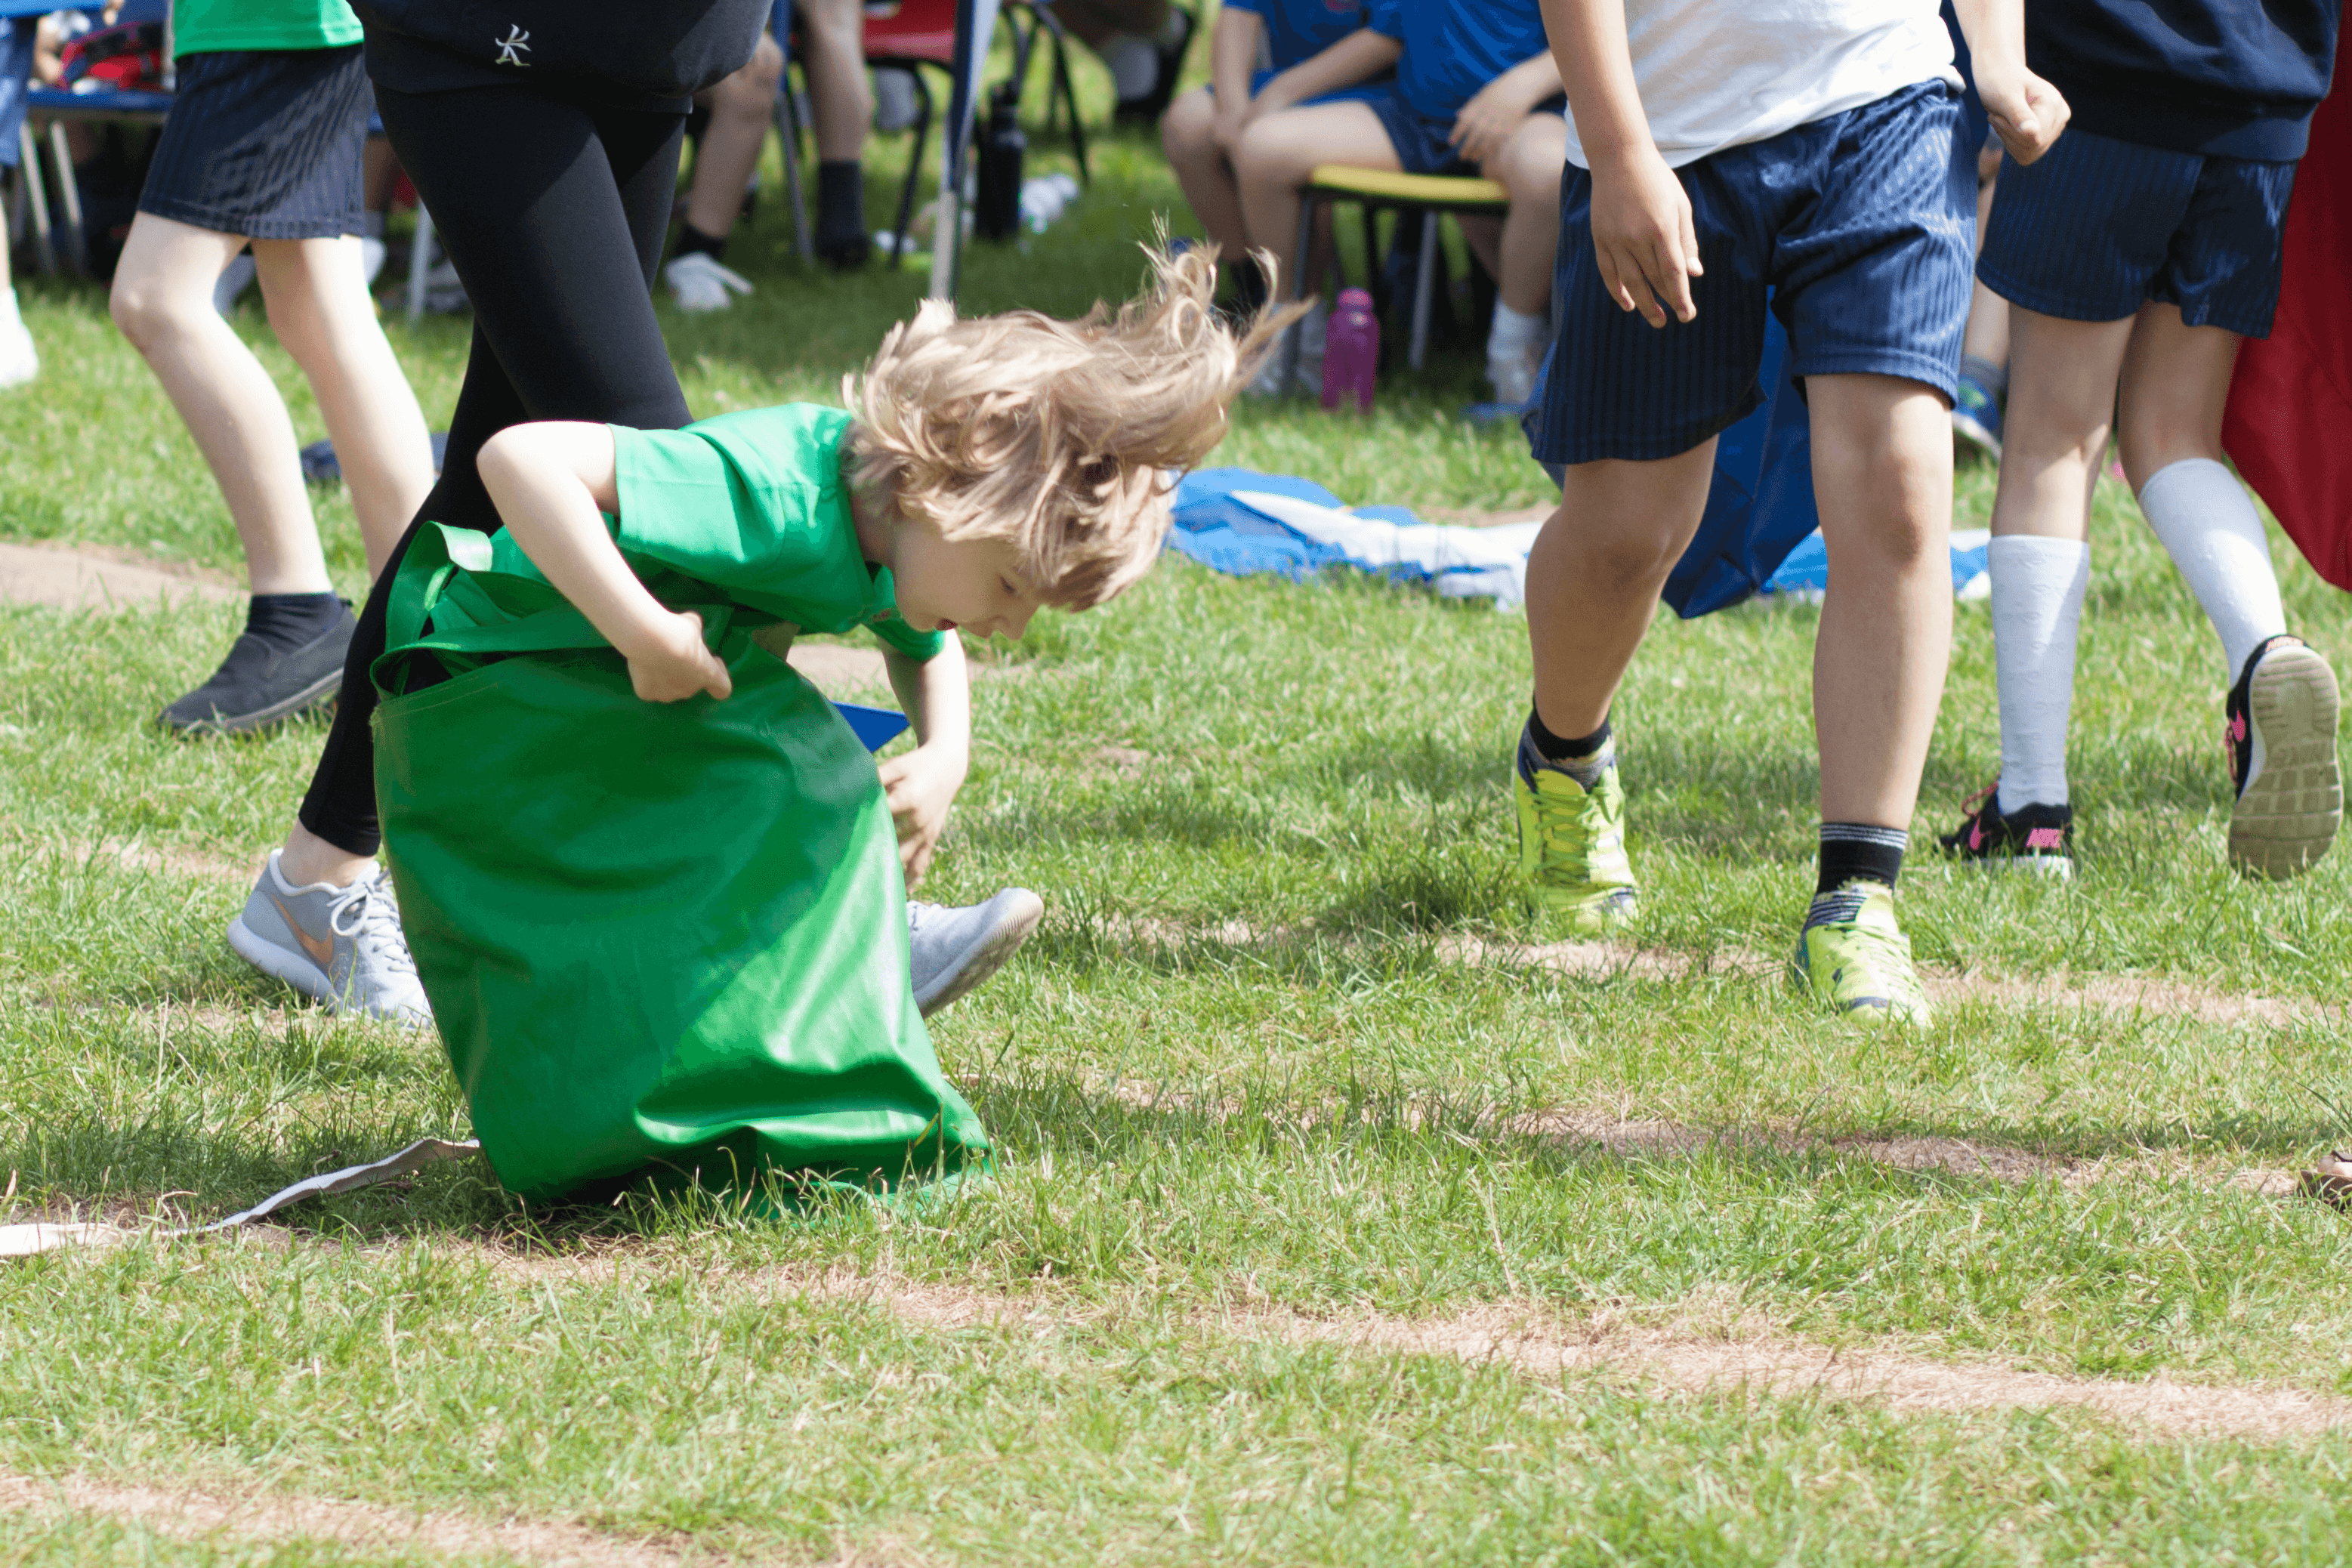 Toby crossing the line in the sack race